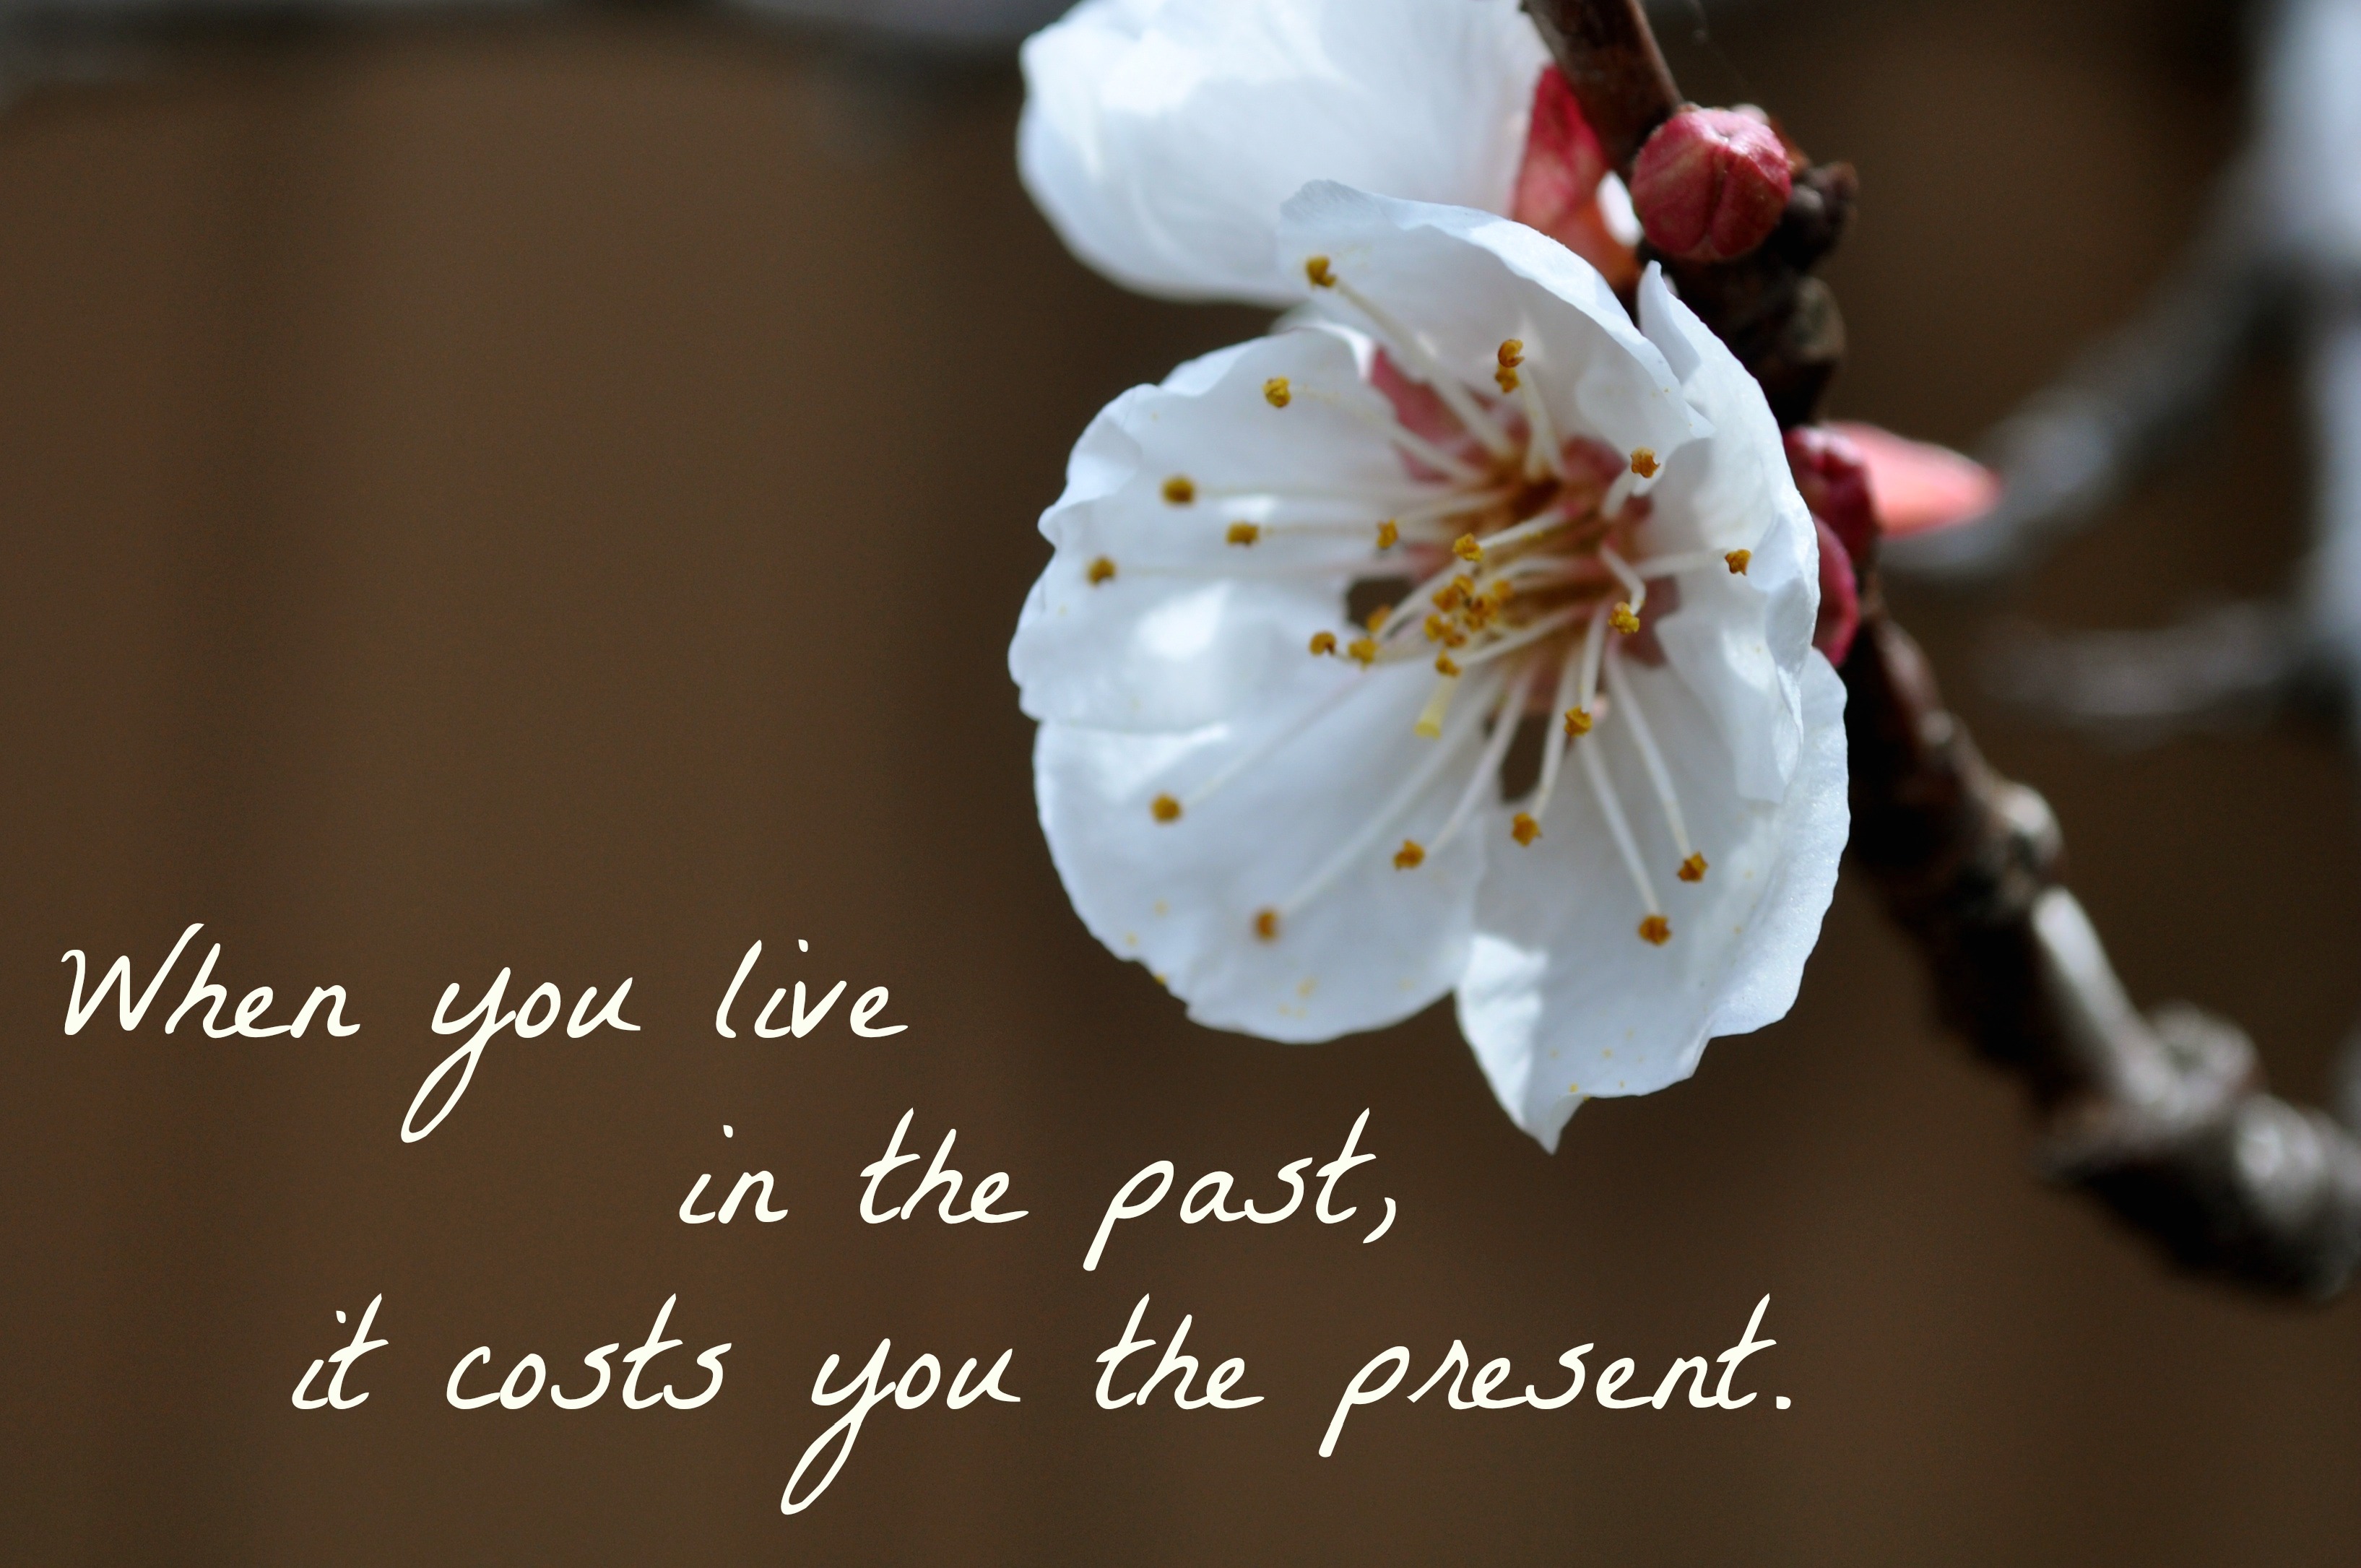 when-you-live-in-the-past-it-cost-you-the-present-simple-sojourns